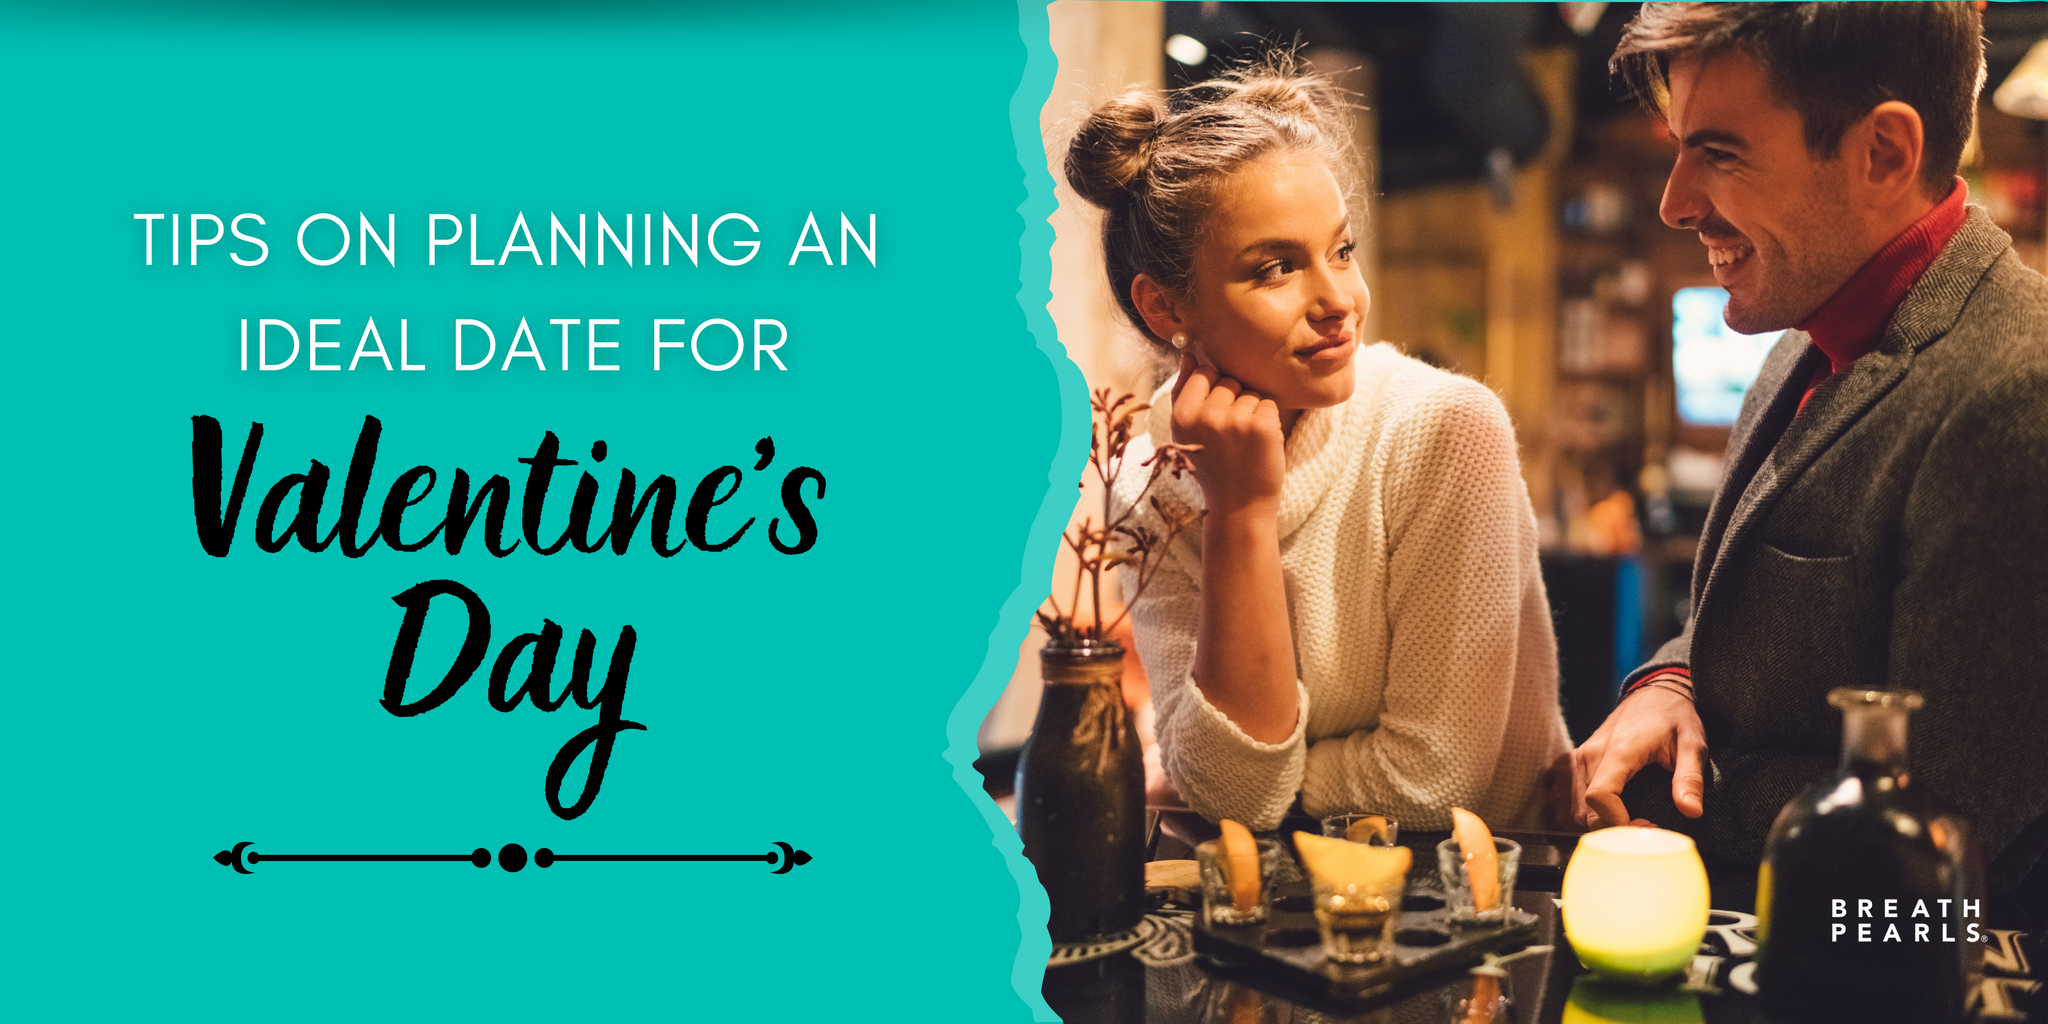 Tips for Planning an Ideal Valentine’s Day Date